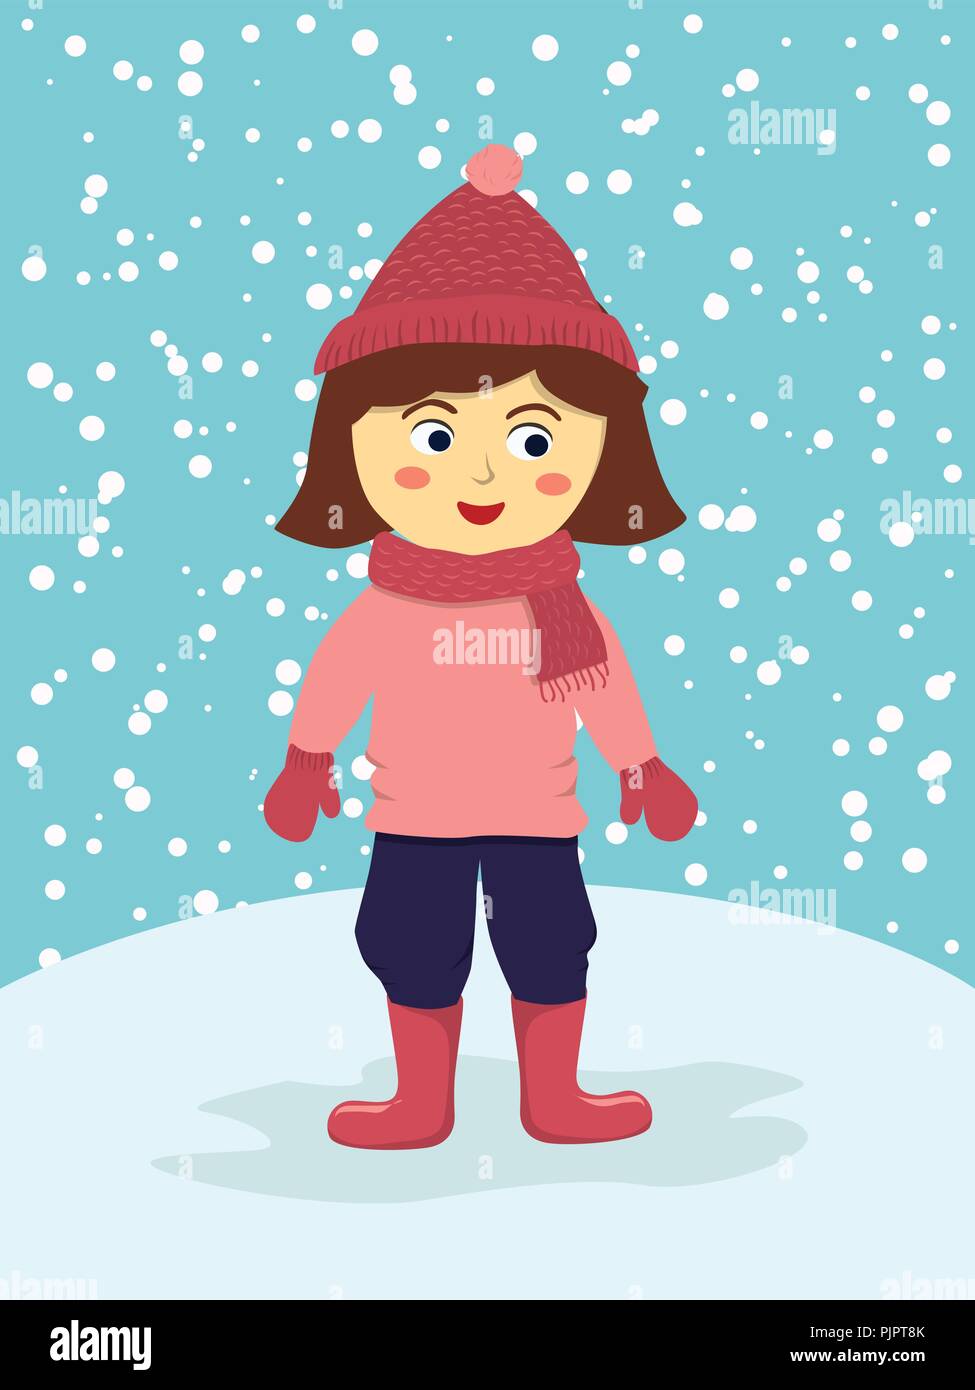 Cute girl wear pink winter suit sweater standing in winter snowy days vector illustration Stock Vector